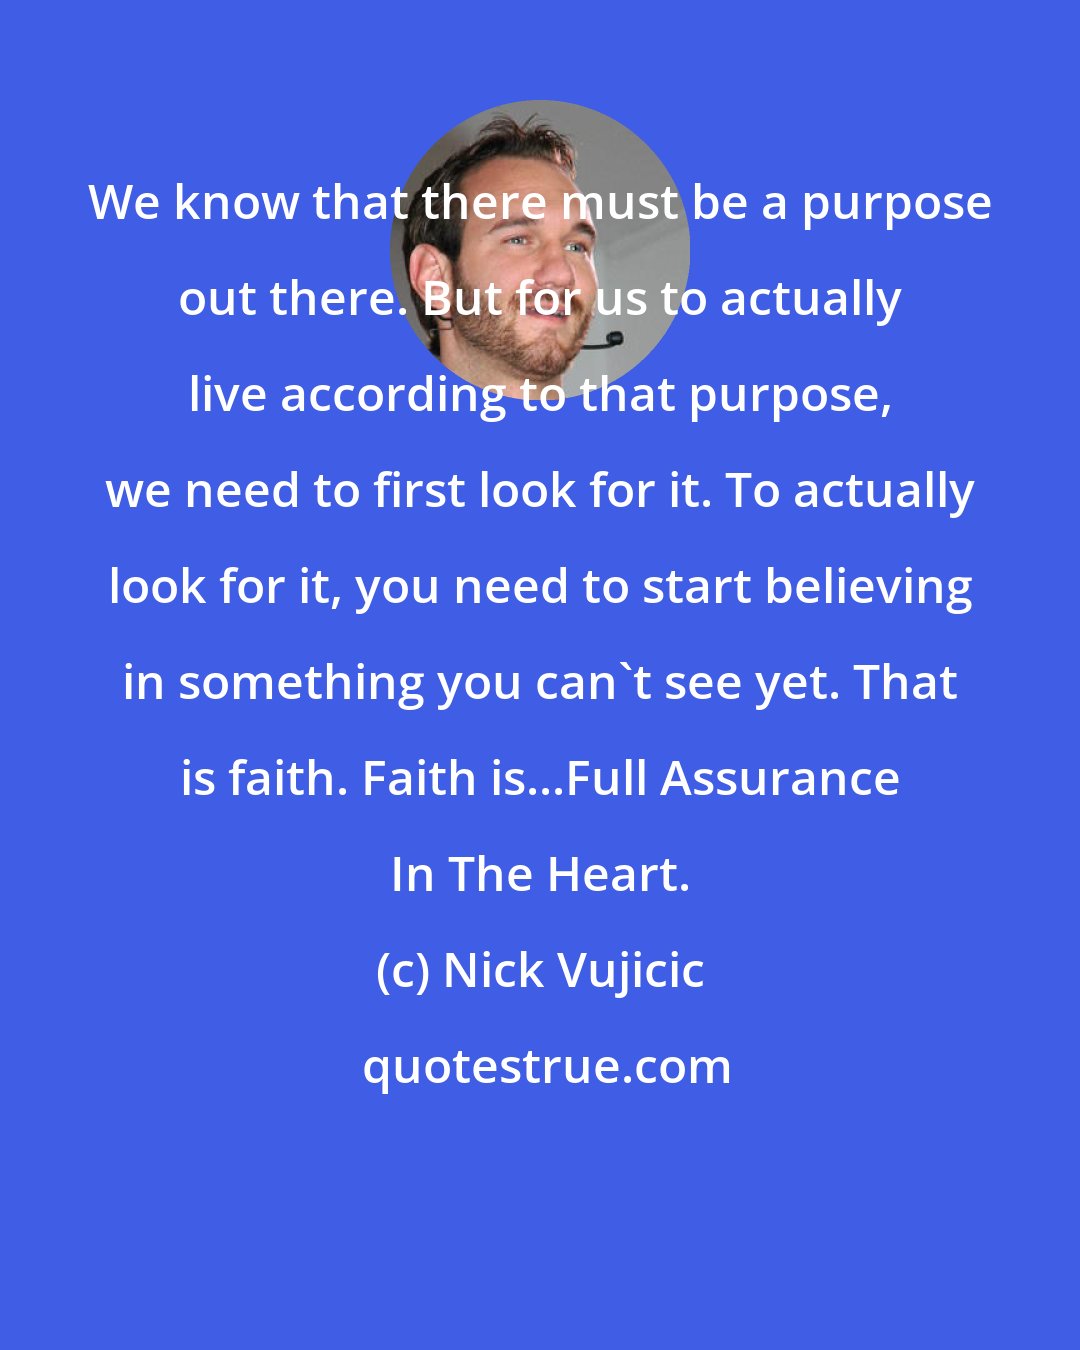 Nick Vujicic: We know that there must be a purpose out there. But for us to actually live according to that purpose, we need to first look for it. To actually look for it, you need to start believing in something you can't see yet. That is faith. Faith is...Full Assurance In The Heart.